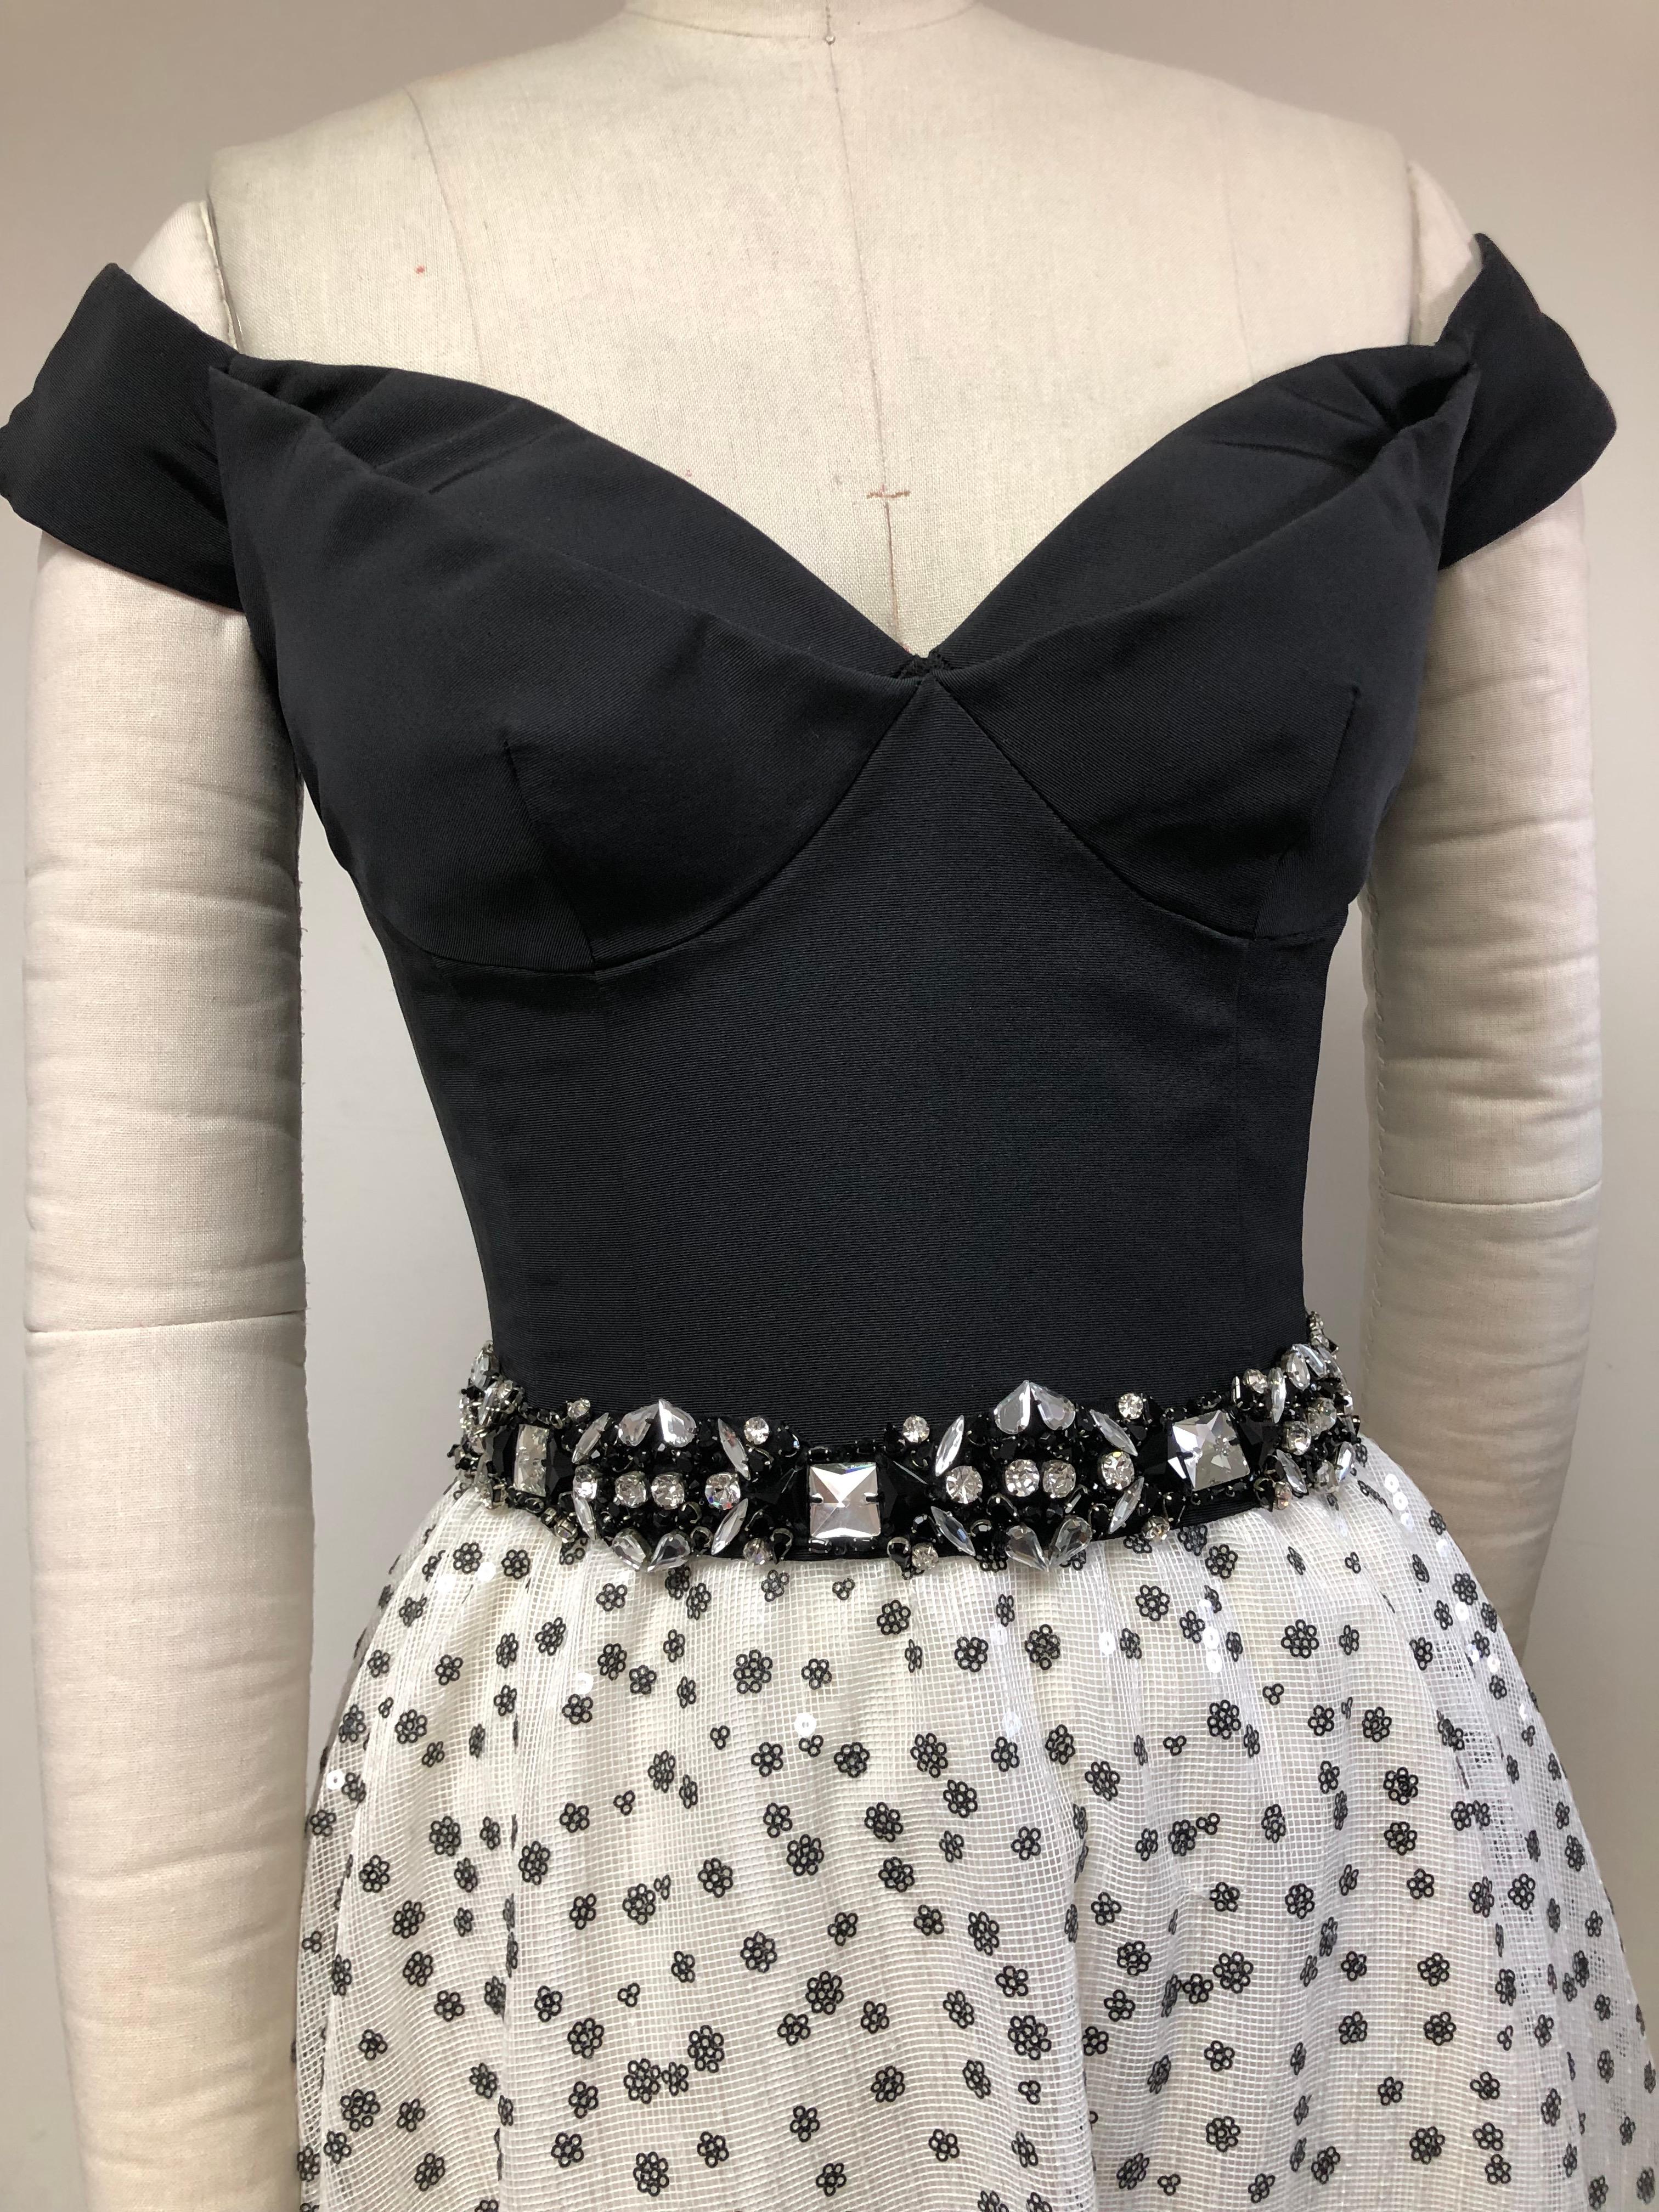 Black and White evening dress ready chic for the party wearing sparkle that never disappoints. 
Black Faille Bustier with Boning and magnificent jeweled belt with a sequined full skirt. This a the only piece of this design  and truly unique. Wedding